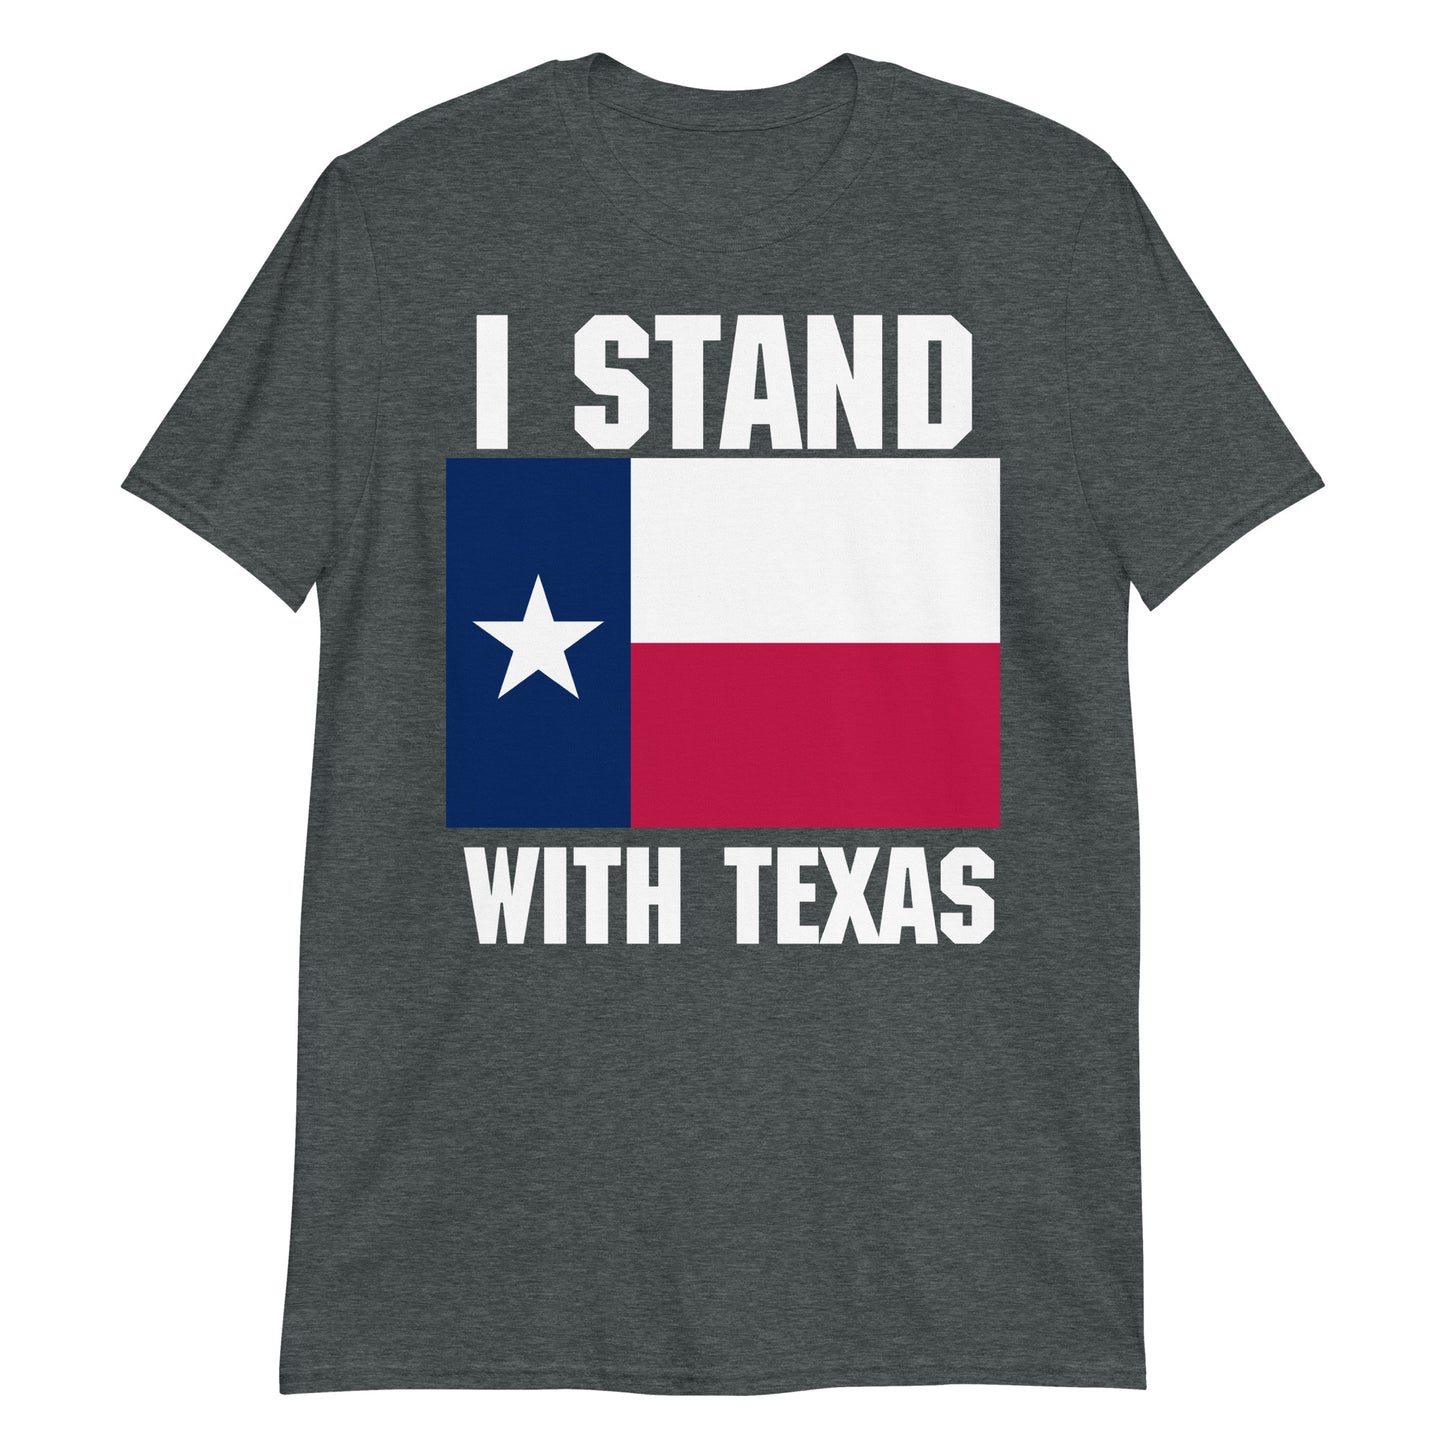 I stand with Texas High Quality Short-Sleeve Unisex T-Shirt